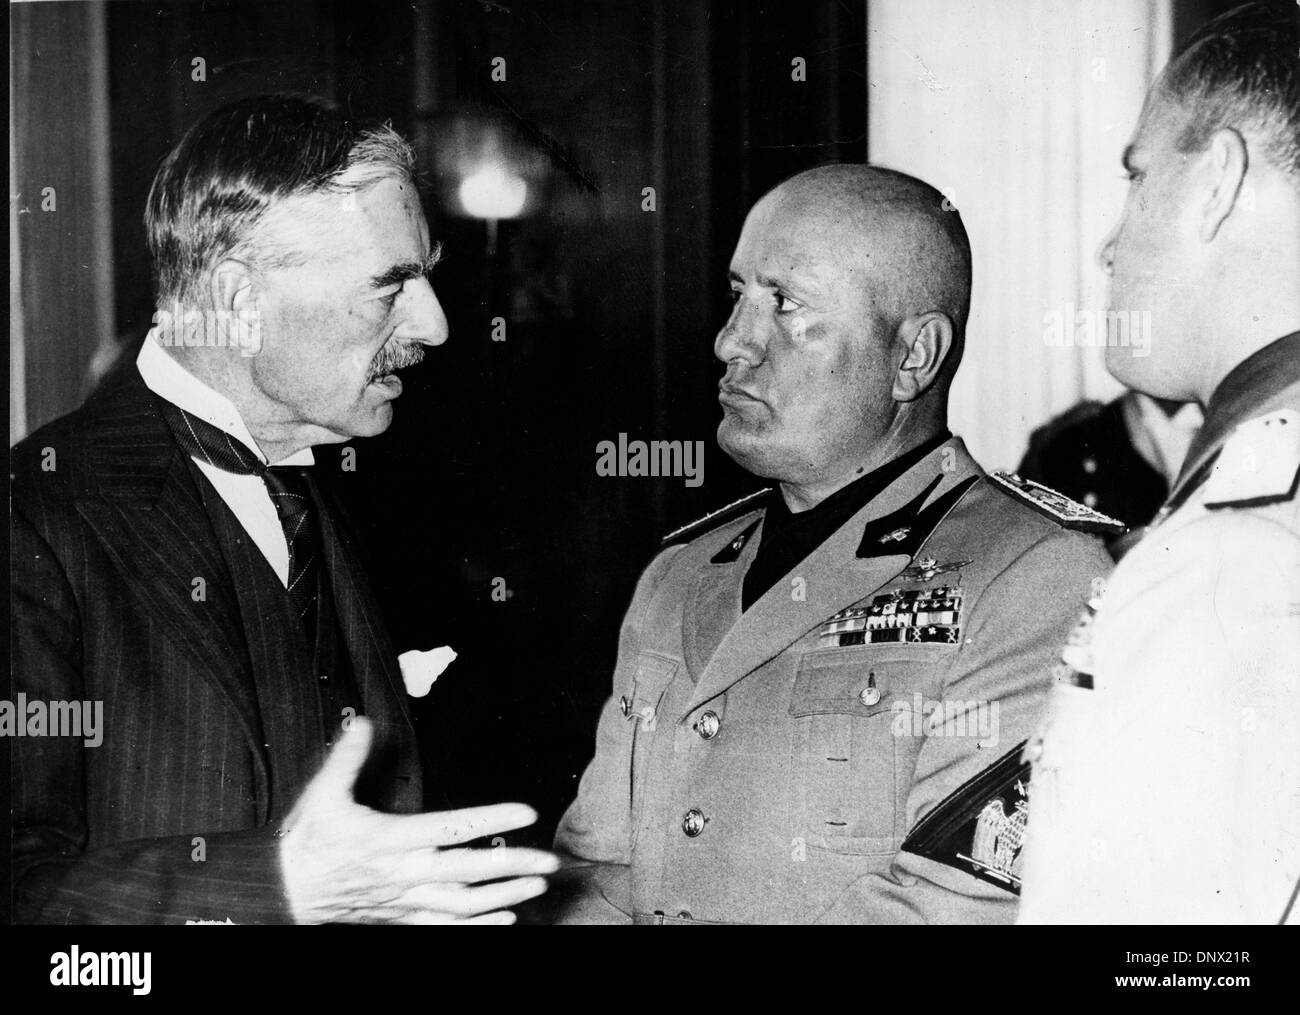 Sept. 30, 1938 - Munich, Germany - BENITO MUSSOLINI (1883-1945) the Italian dictator and leader of the Fascist movement talking with CHAMERLAIN at a conference in Munich. (Credit Image: © KEYSTONE Pictures USA/ZUMAPRESS.com) Stock Photo